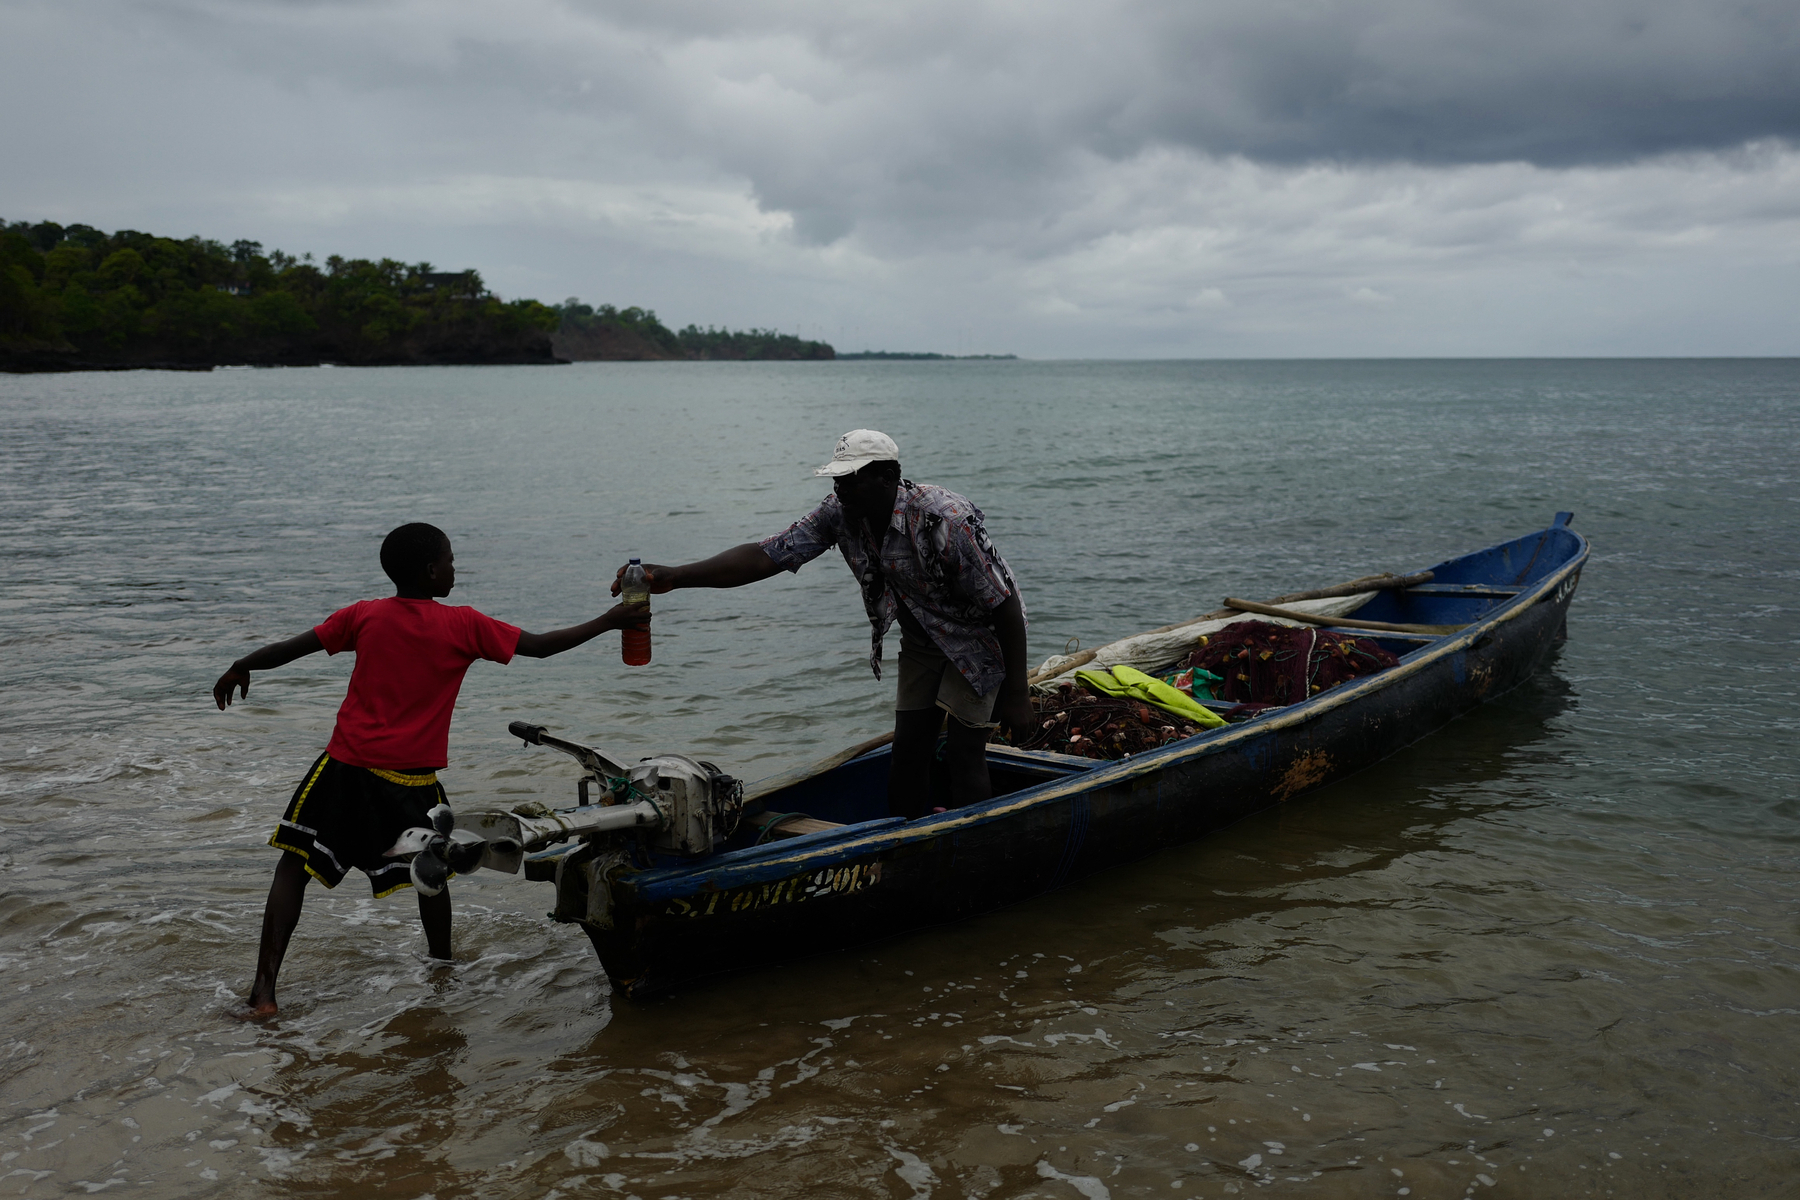 A man hands his son a bottle of petrol, while standing on a canoe, in the water. Late afternoon, cloudy skies. 